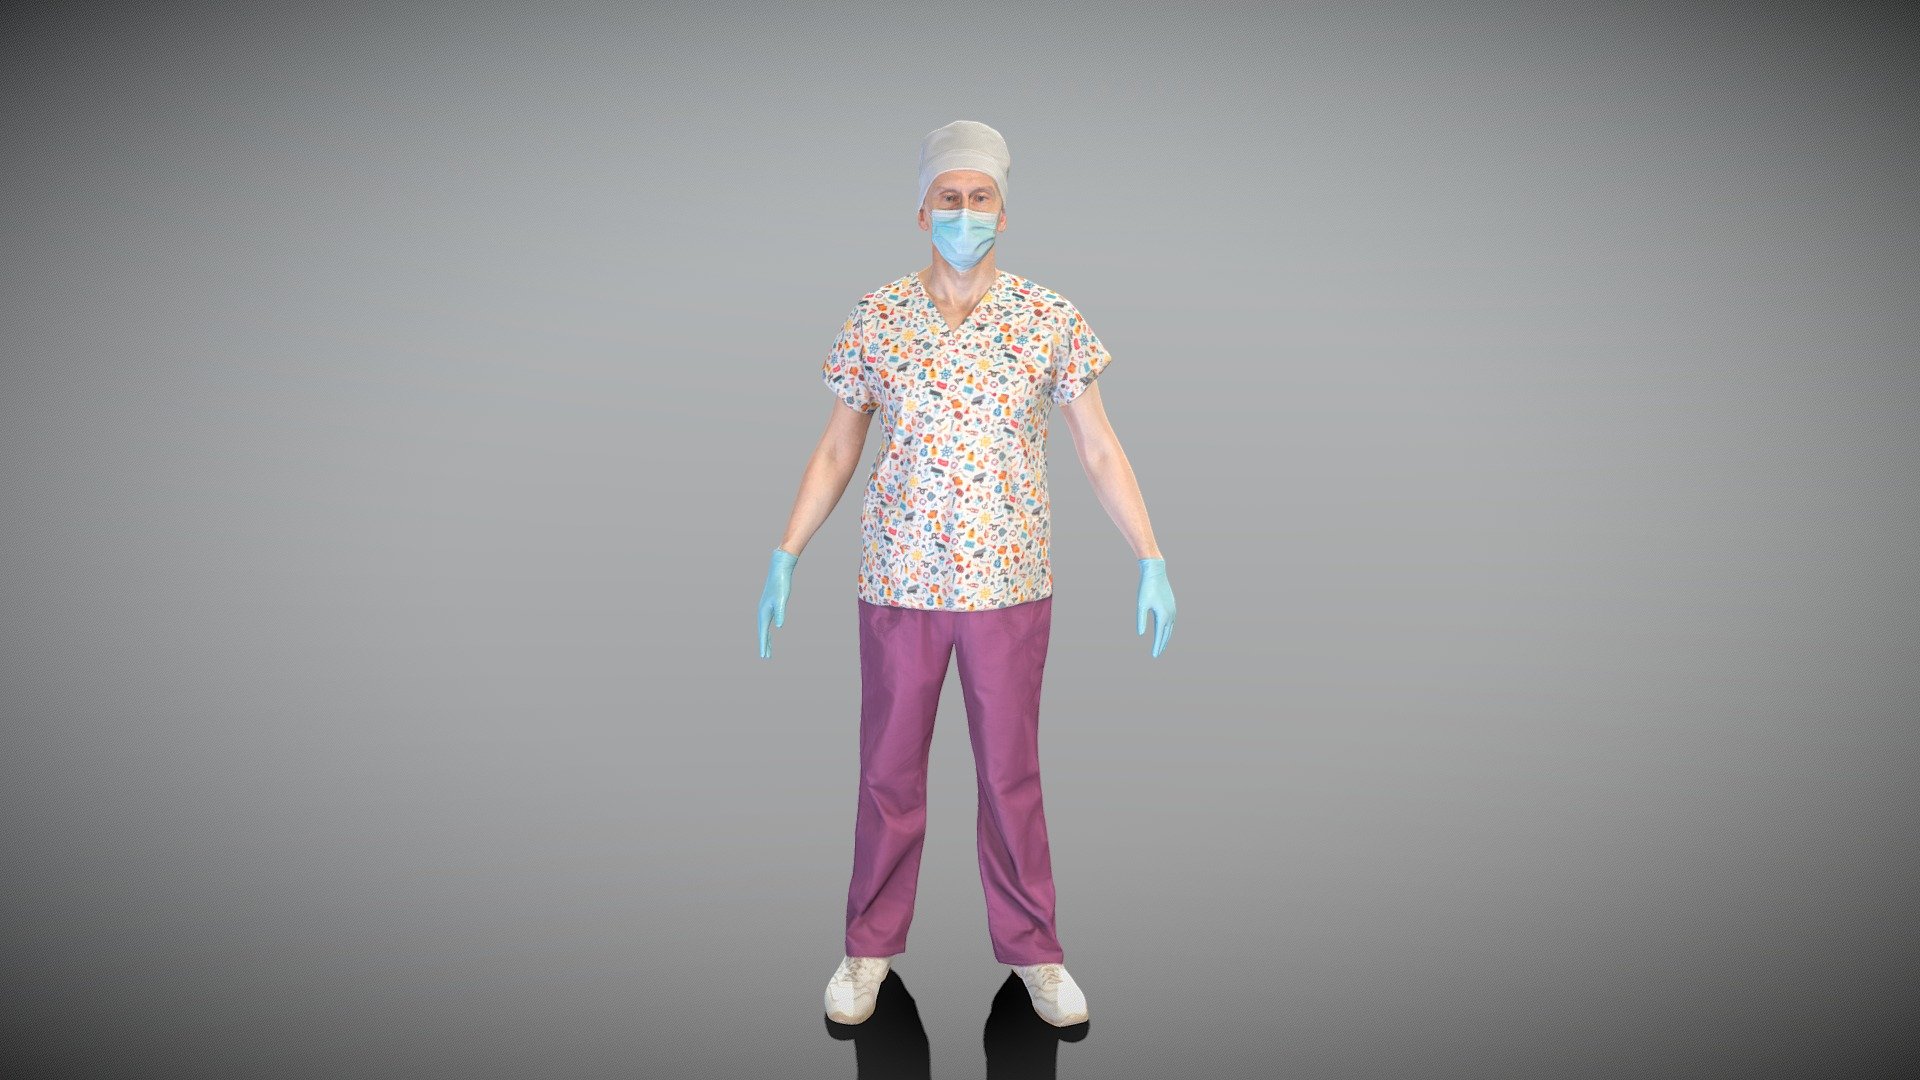 This is a true human size and detailed model of a man of Caucasian appearance dressed in a uniform of a medical doctor. The model is captured in the A-pose with mesh ready for rigging and animation in all most usable 3d software.

Technical specifications:




digital double scan model

low-poly model

high-poly model (.ztl tool with 5-6 subdivisions) clean and retopologized automatically via ZRemesher

fully quad topology

sufficiently clean

edge Loops based

ready for subdivision

8K texture color map

non-overlapping UV map

ready for animation

PBR textures 8K resolution: Normal, Displacement, Albedo maps

Download package includes a Cinema 4D project file with Redshift shader, OBJ, FBX, STL files, which are applicable for 3ds Max, Maya, Unreal Engine, Unity, Blender, etc. All the textures you will find in the “Tex” folder, included into the main archive.

3D EVERYTHING

Stand with Ukraine! - Male surgeon ready for surgery in A-pose 426 - Buy Royalty Free 3D model by deep3dstudio 3d model